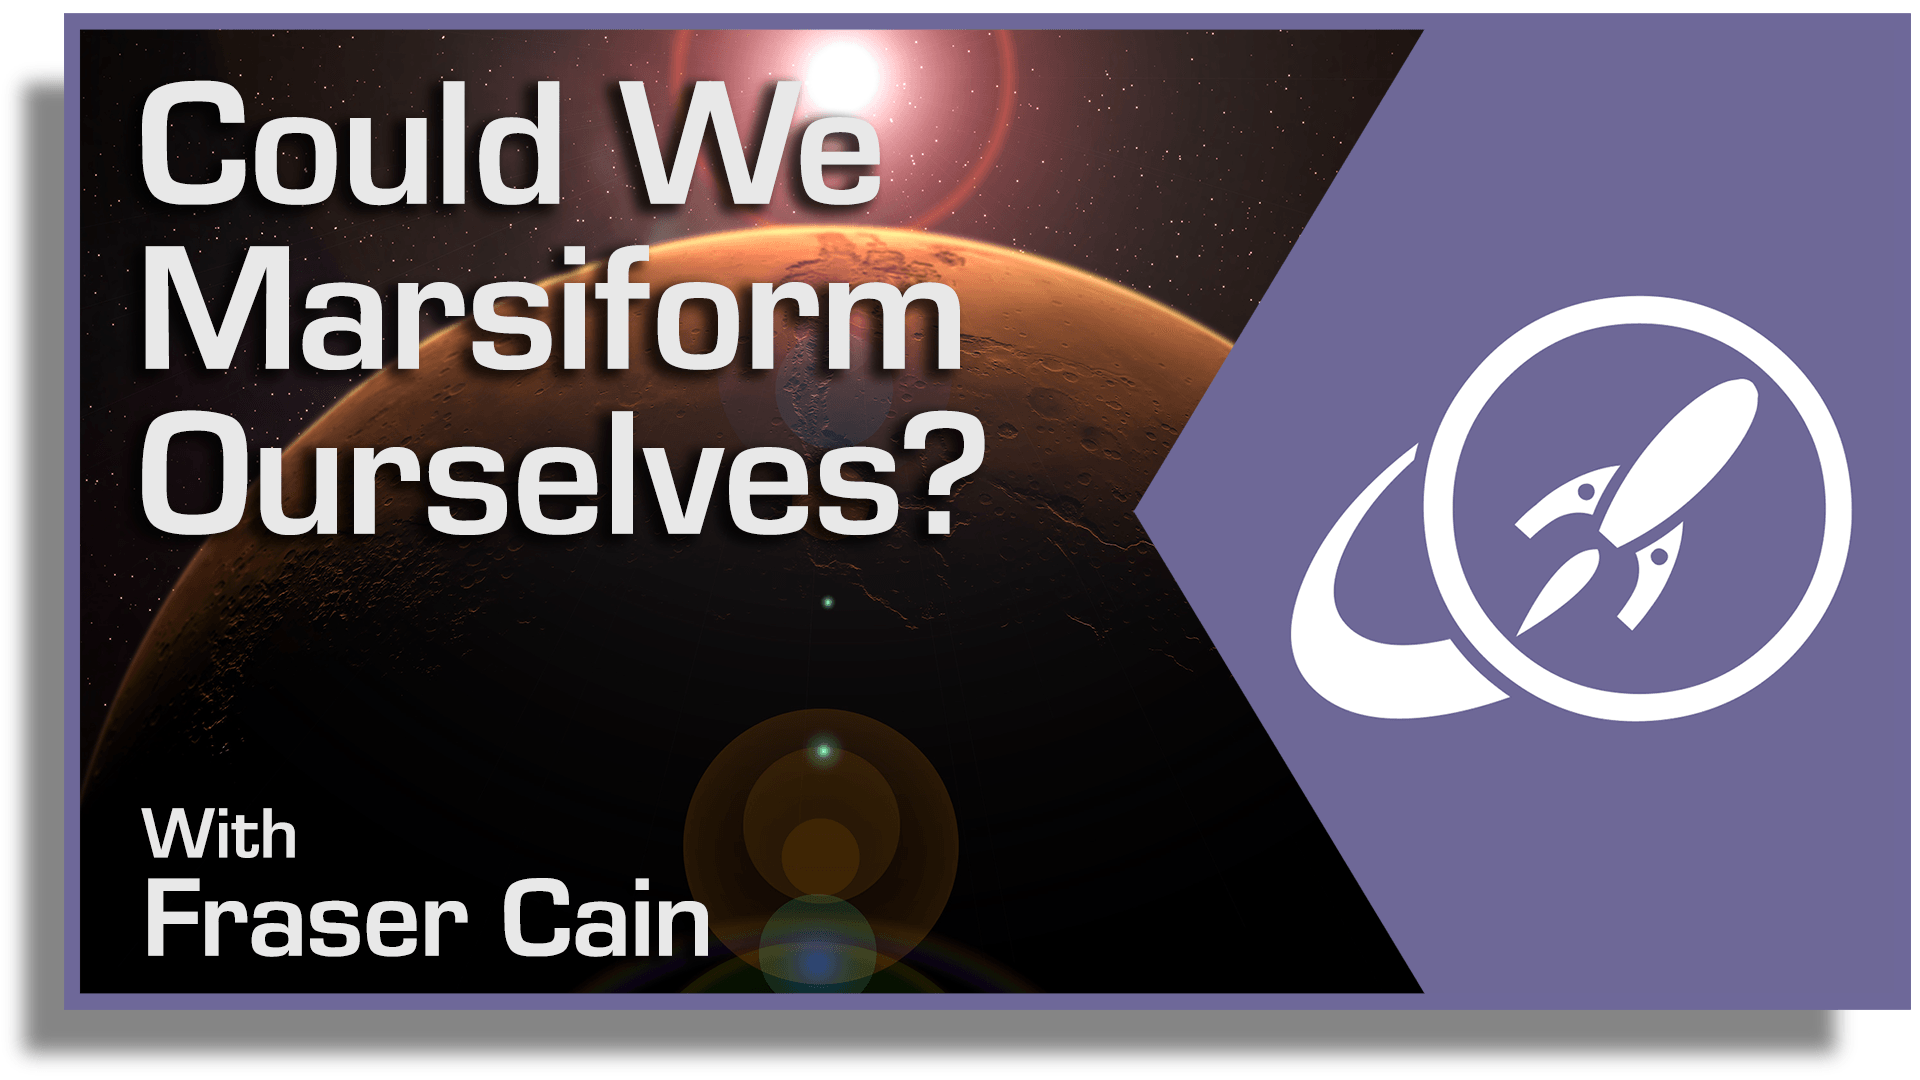 Could We Marsiform Ourselves?